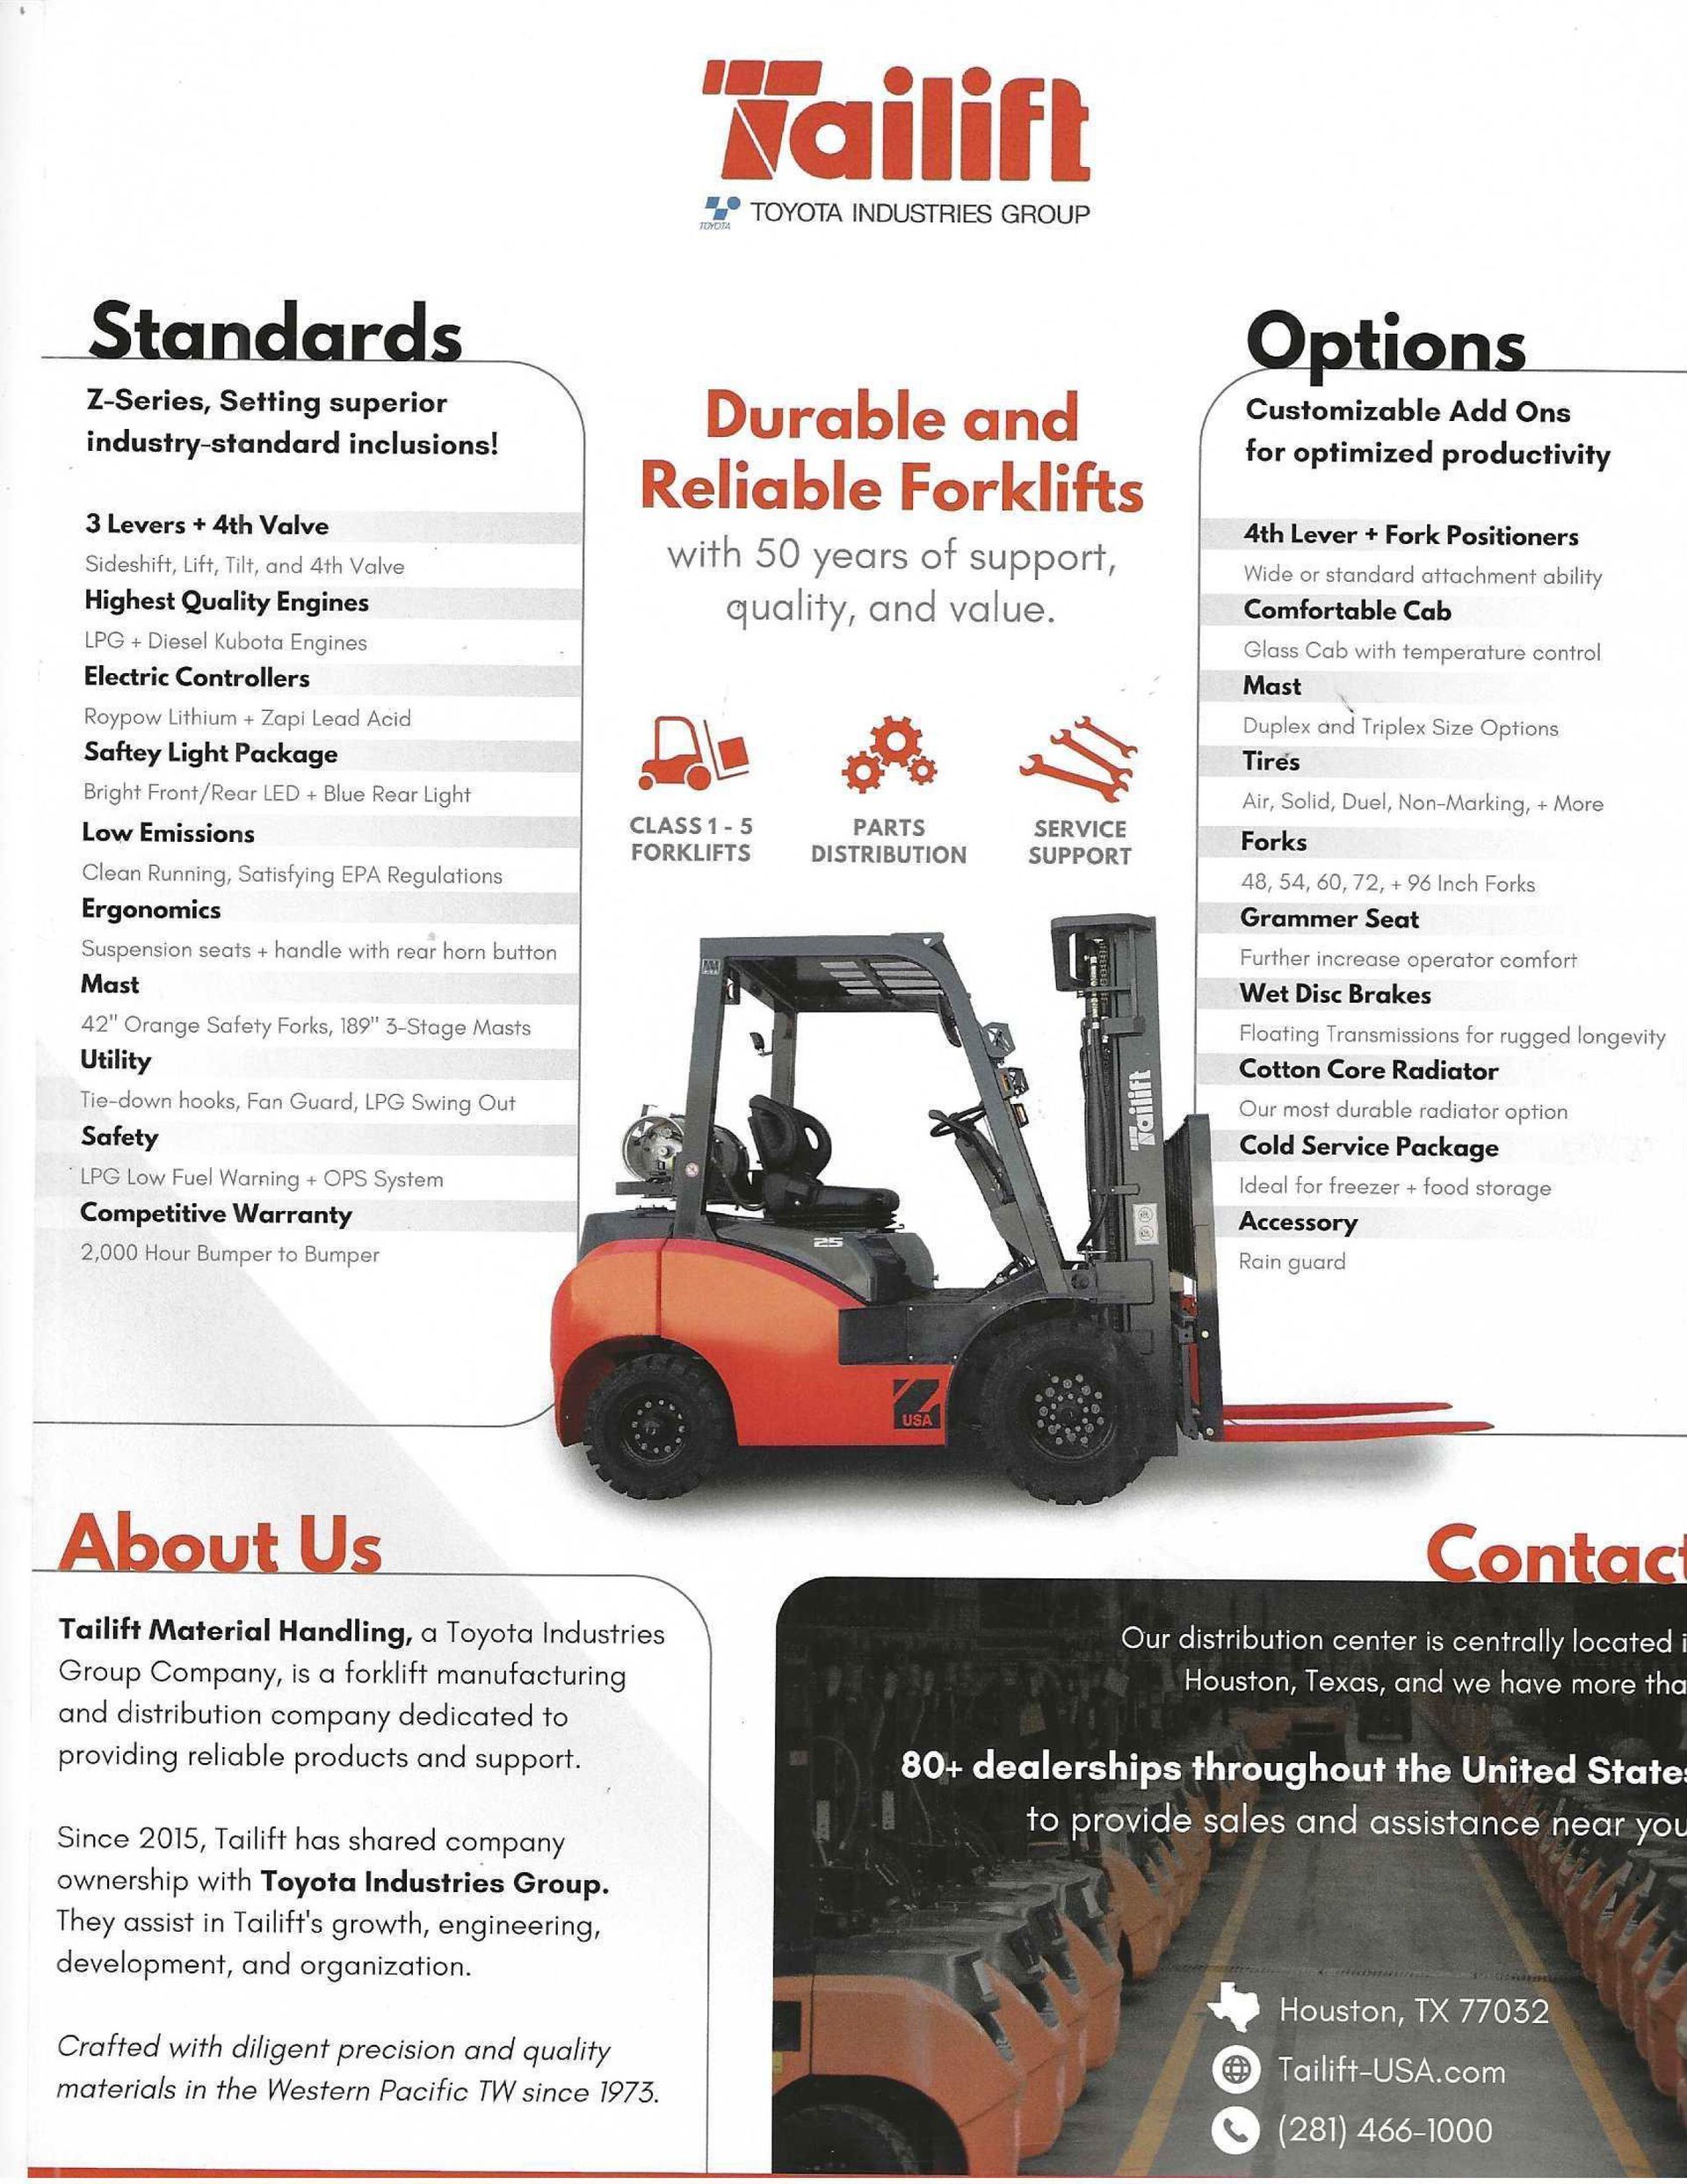 Durable and Reliable Forklifts by Tailift